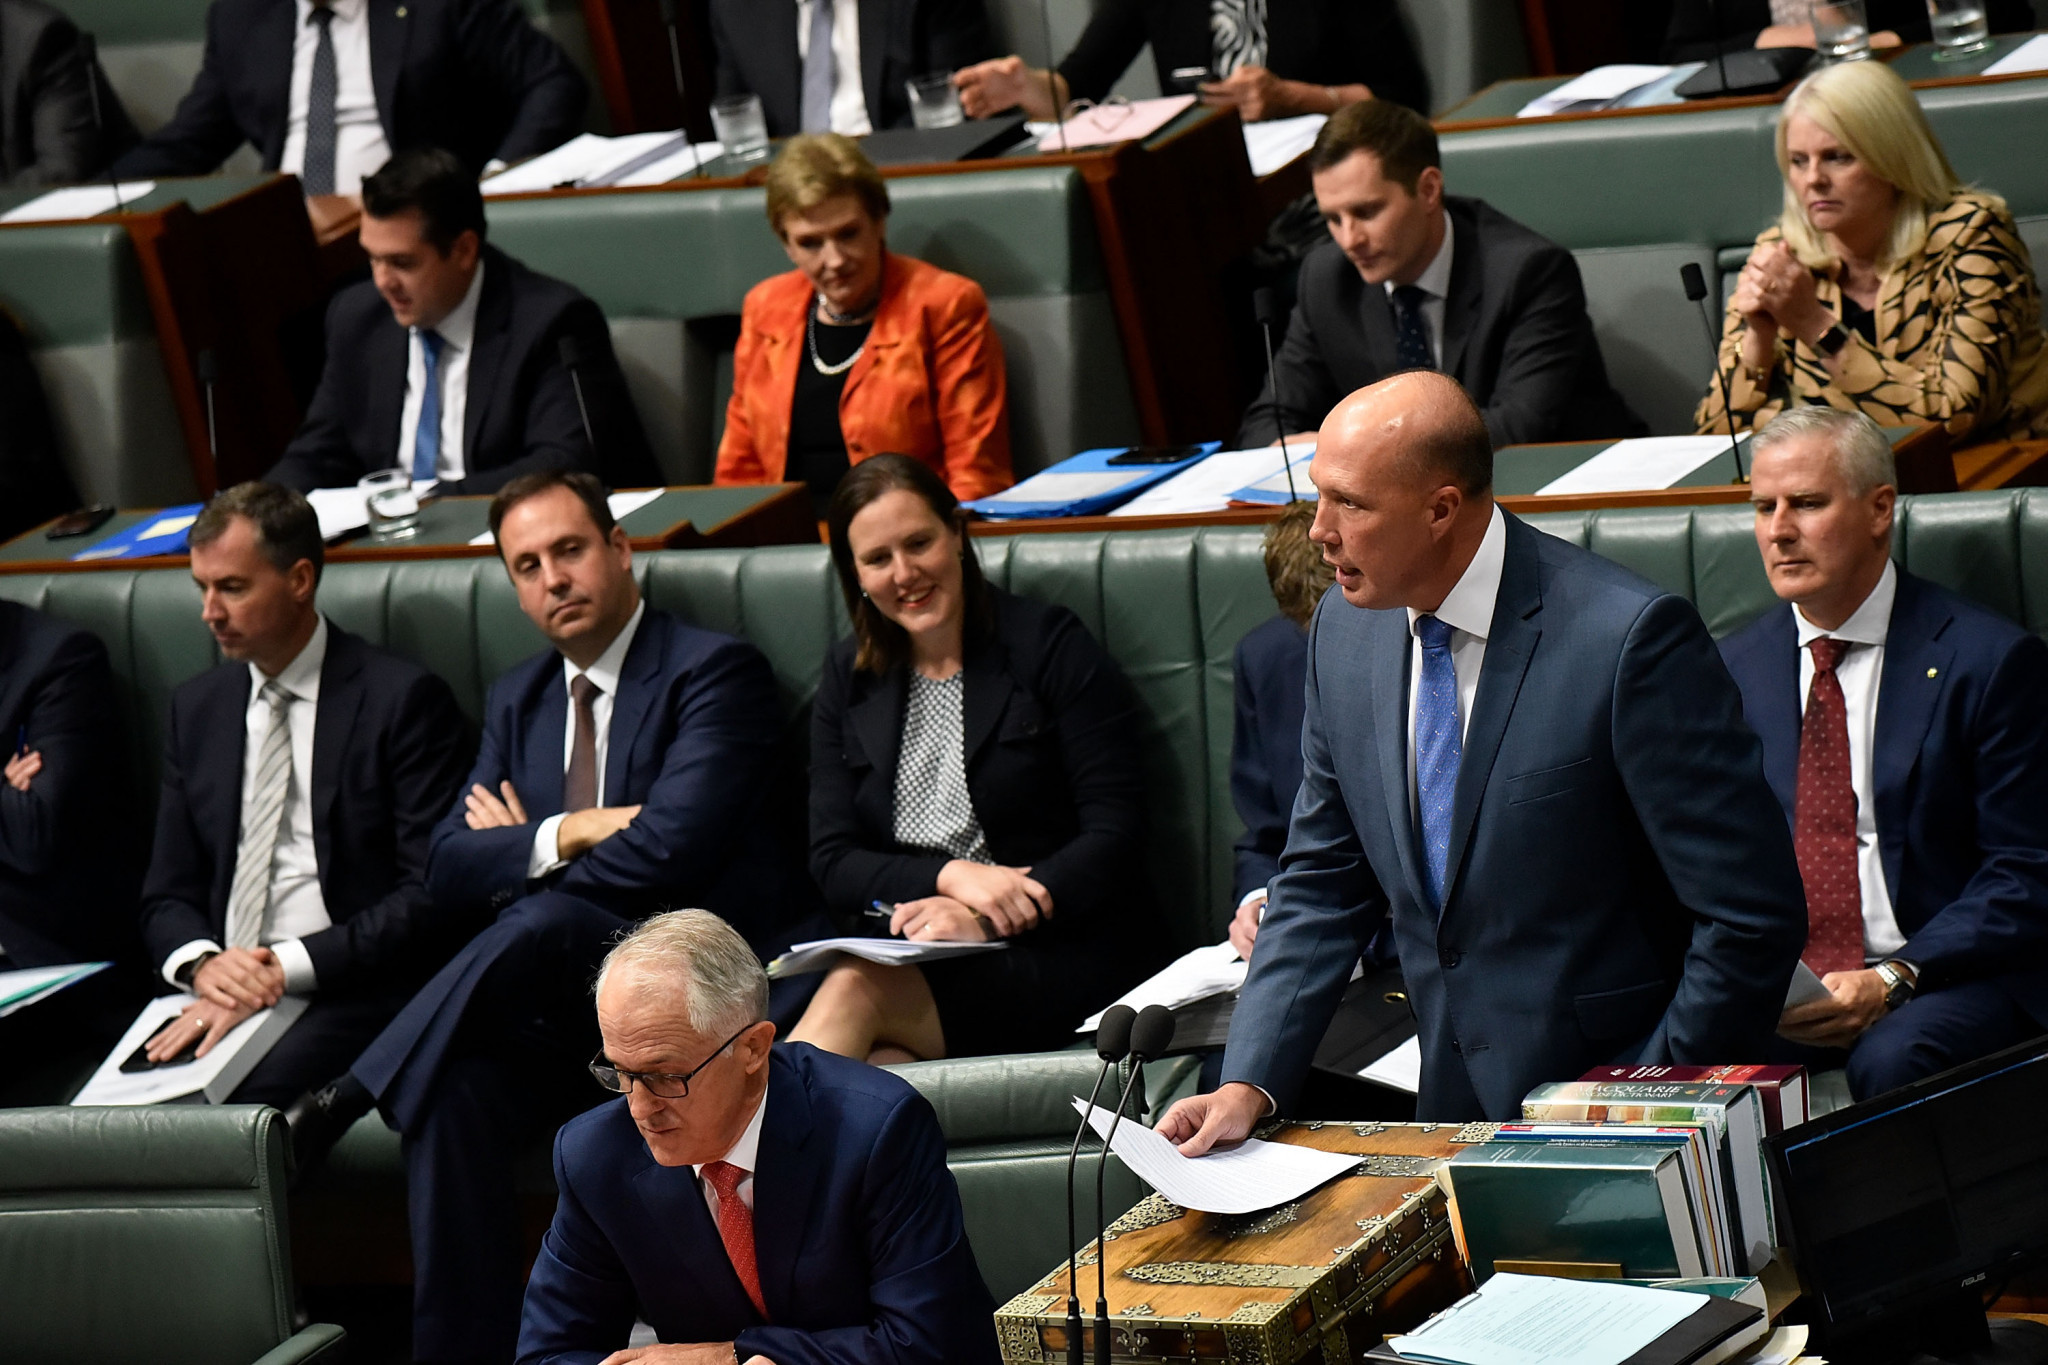 Home Affairs Minister Peter Dutton has claimed countries competing at major events such as the Olympics and the Commonwealth Games should pay a bond to the host nation ©Getty Images